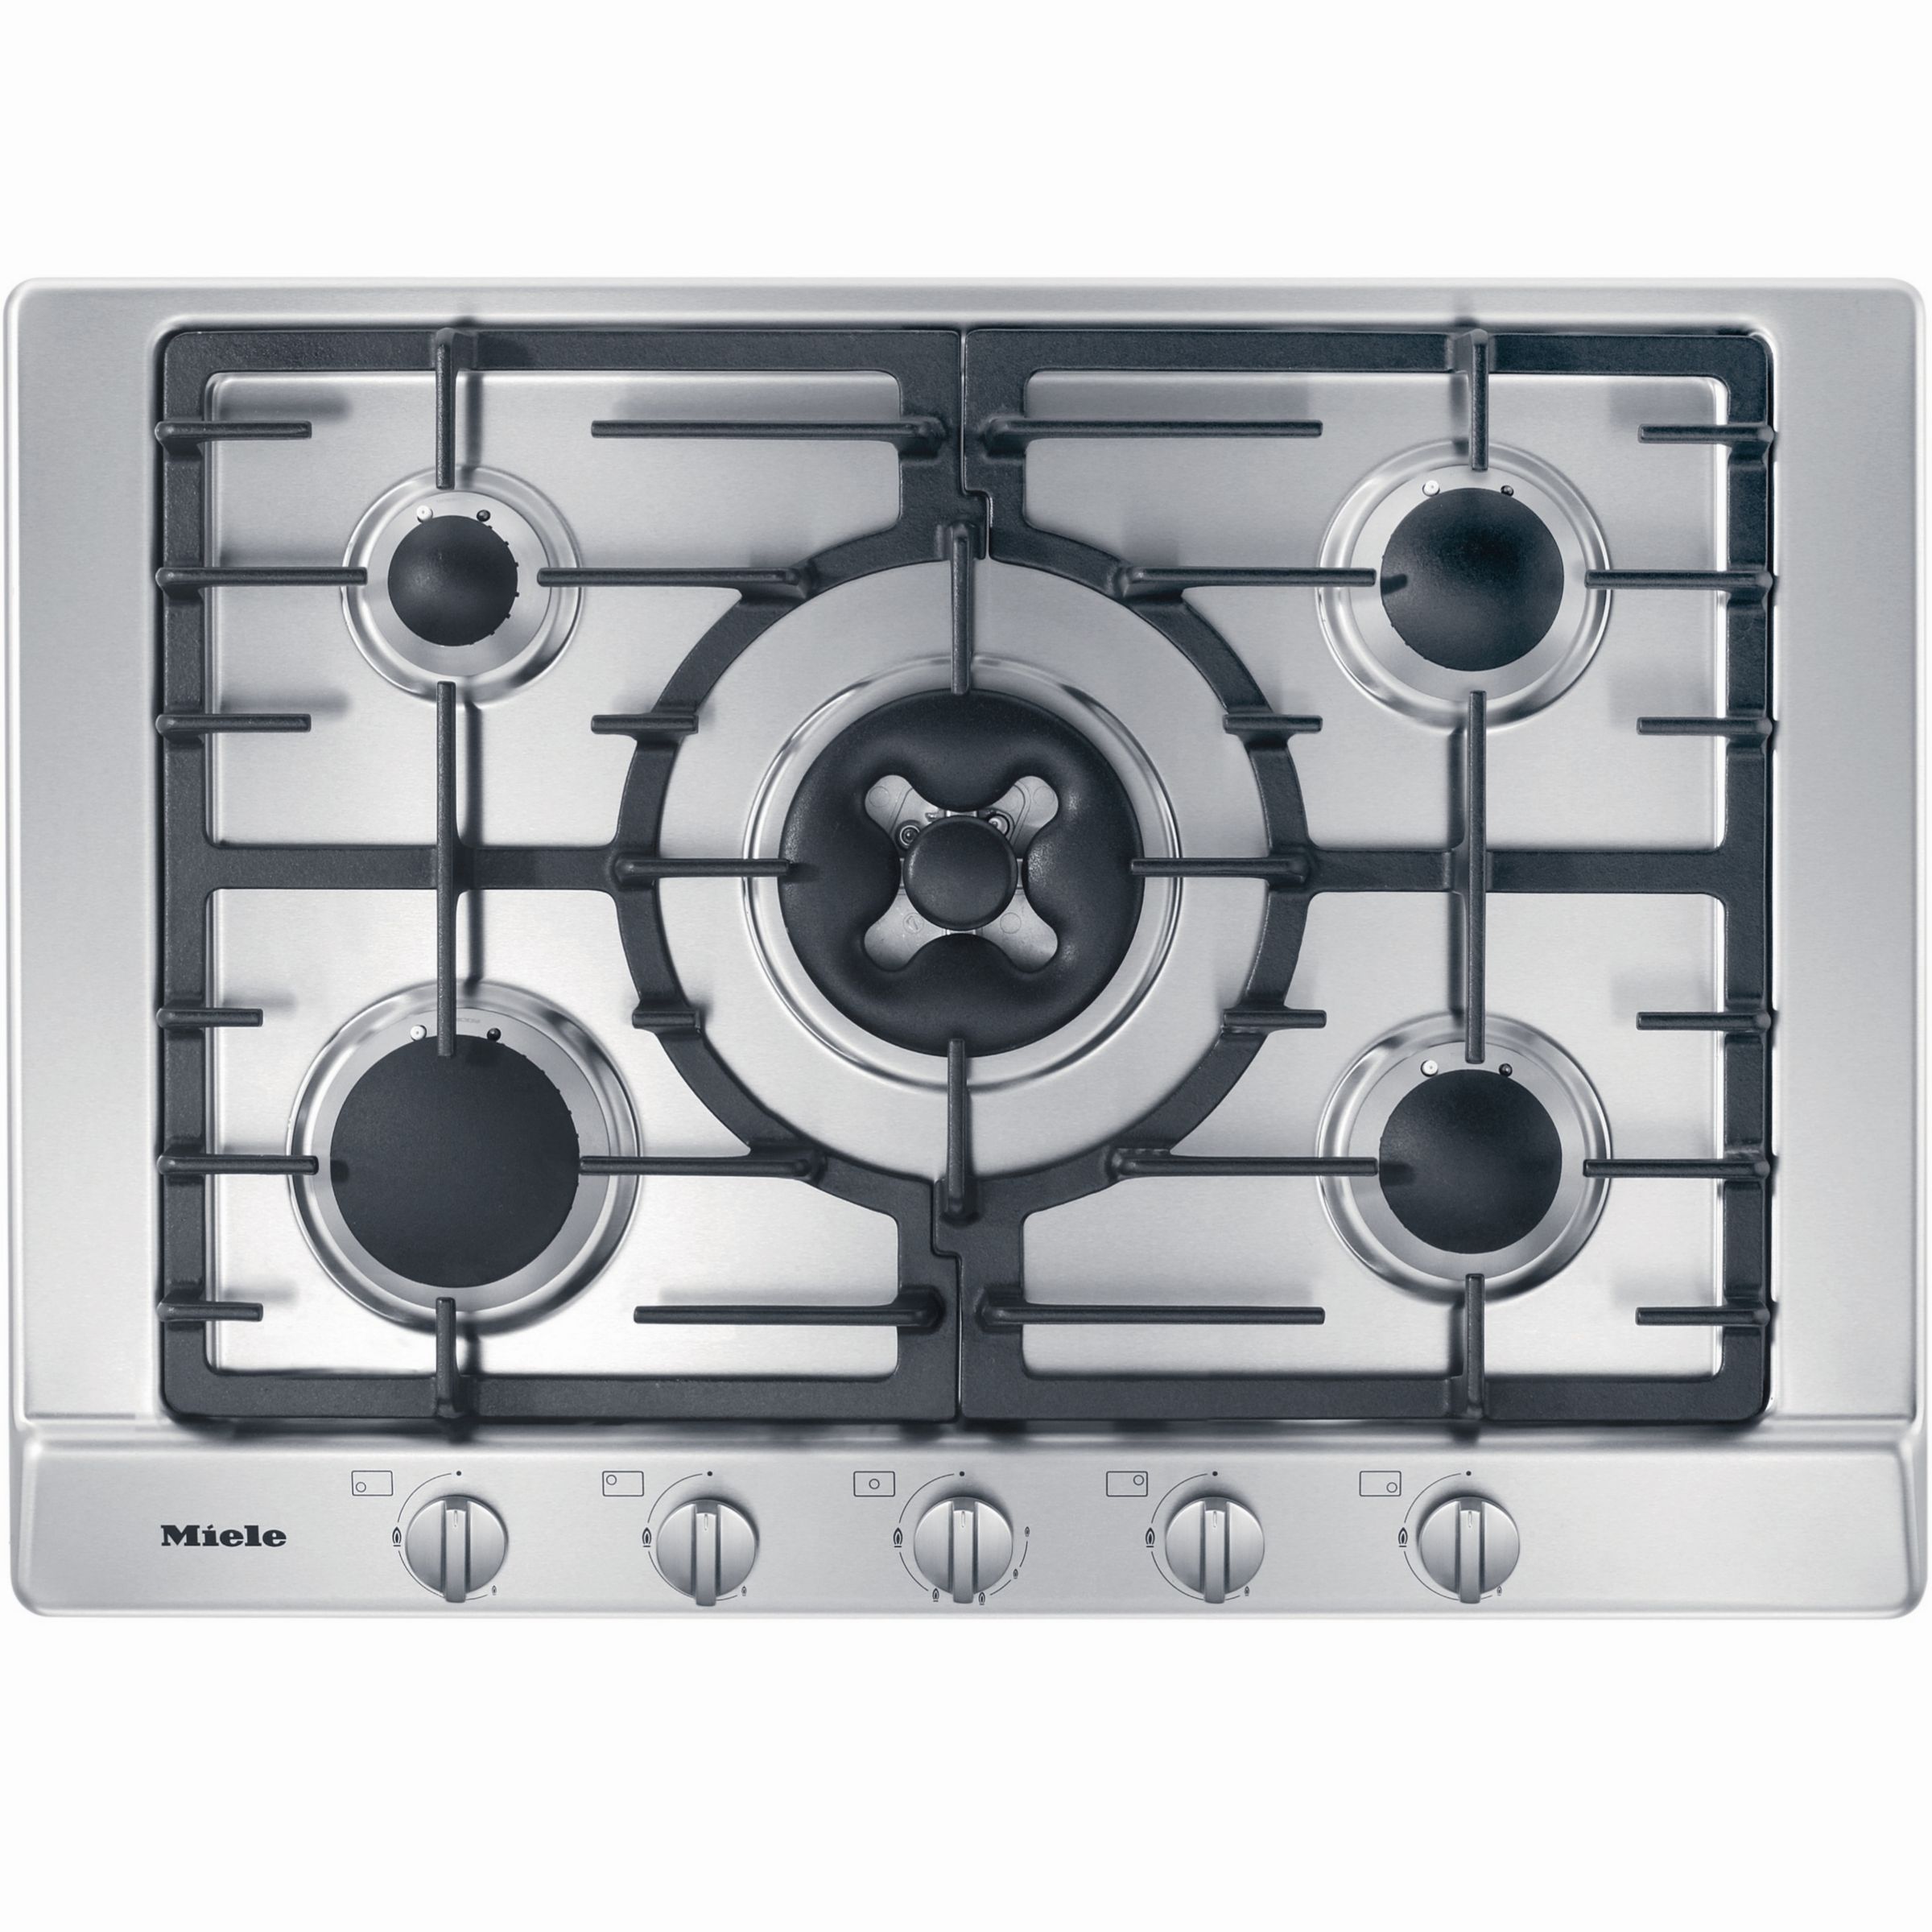 Miele KM2034 Gas Hob, Stainless Steel at John Lewis